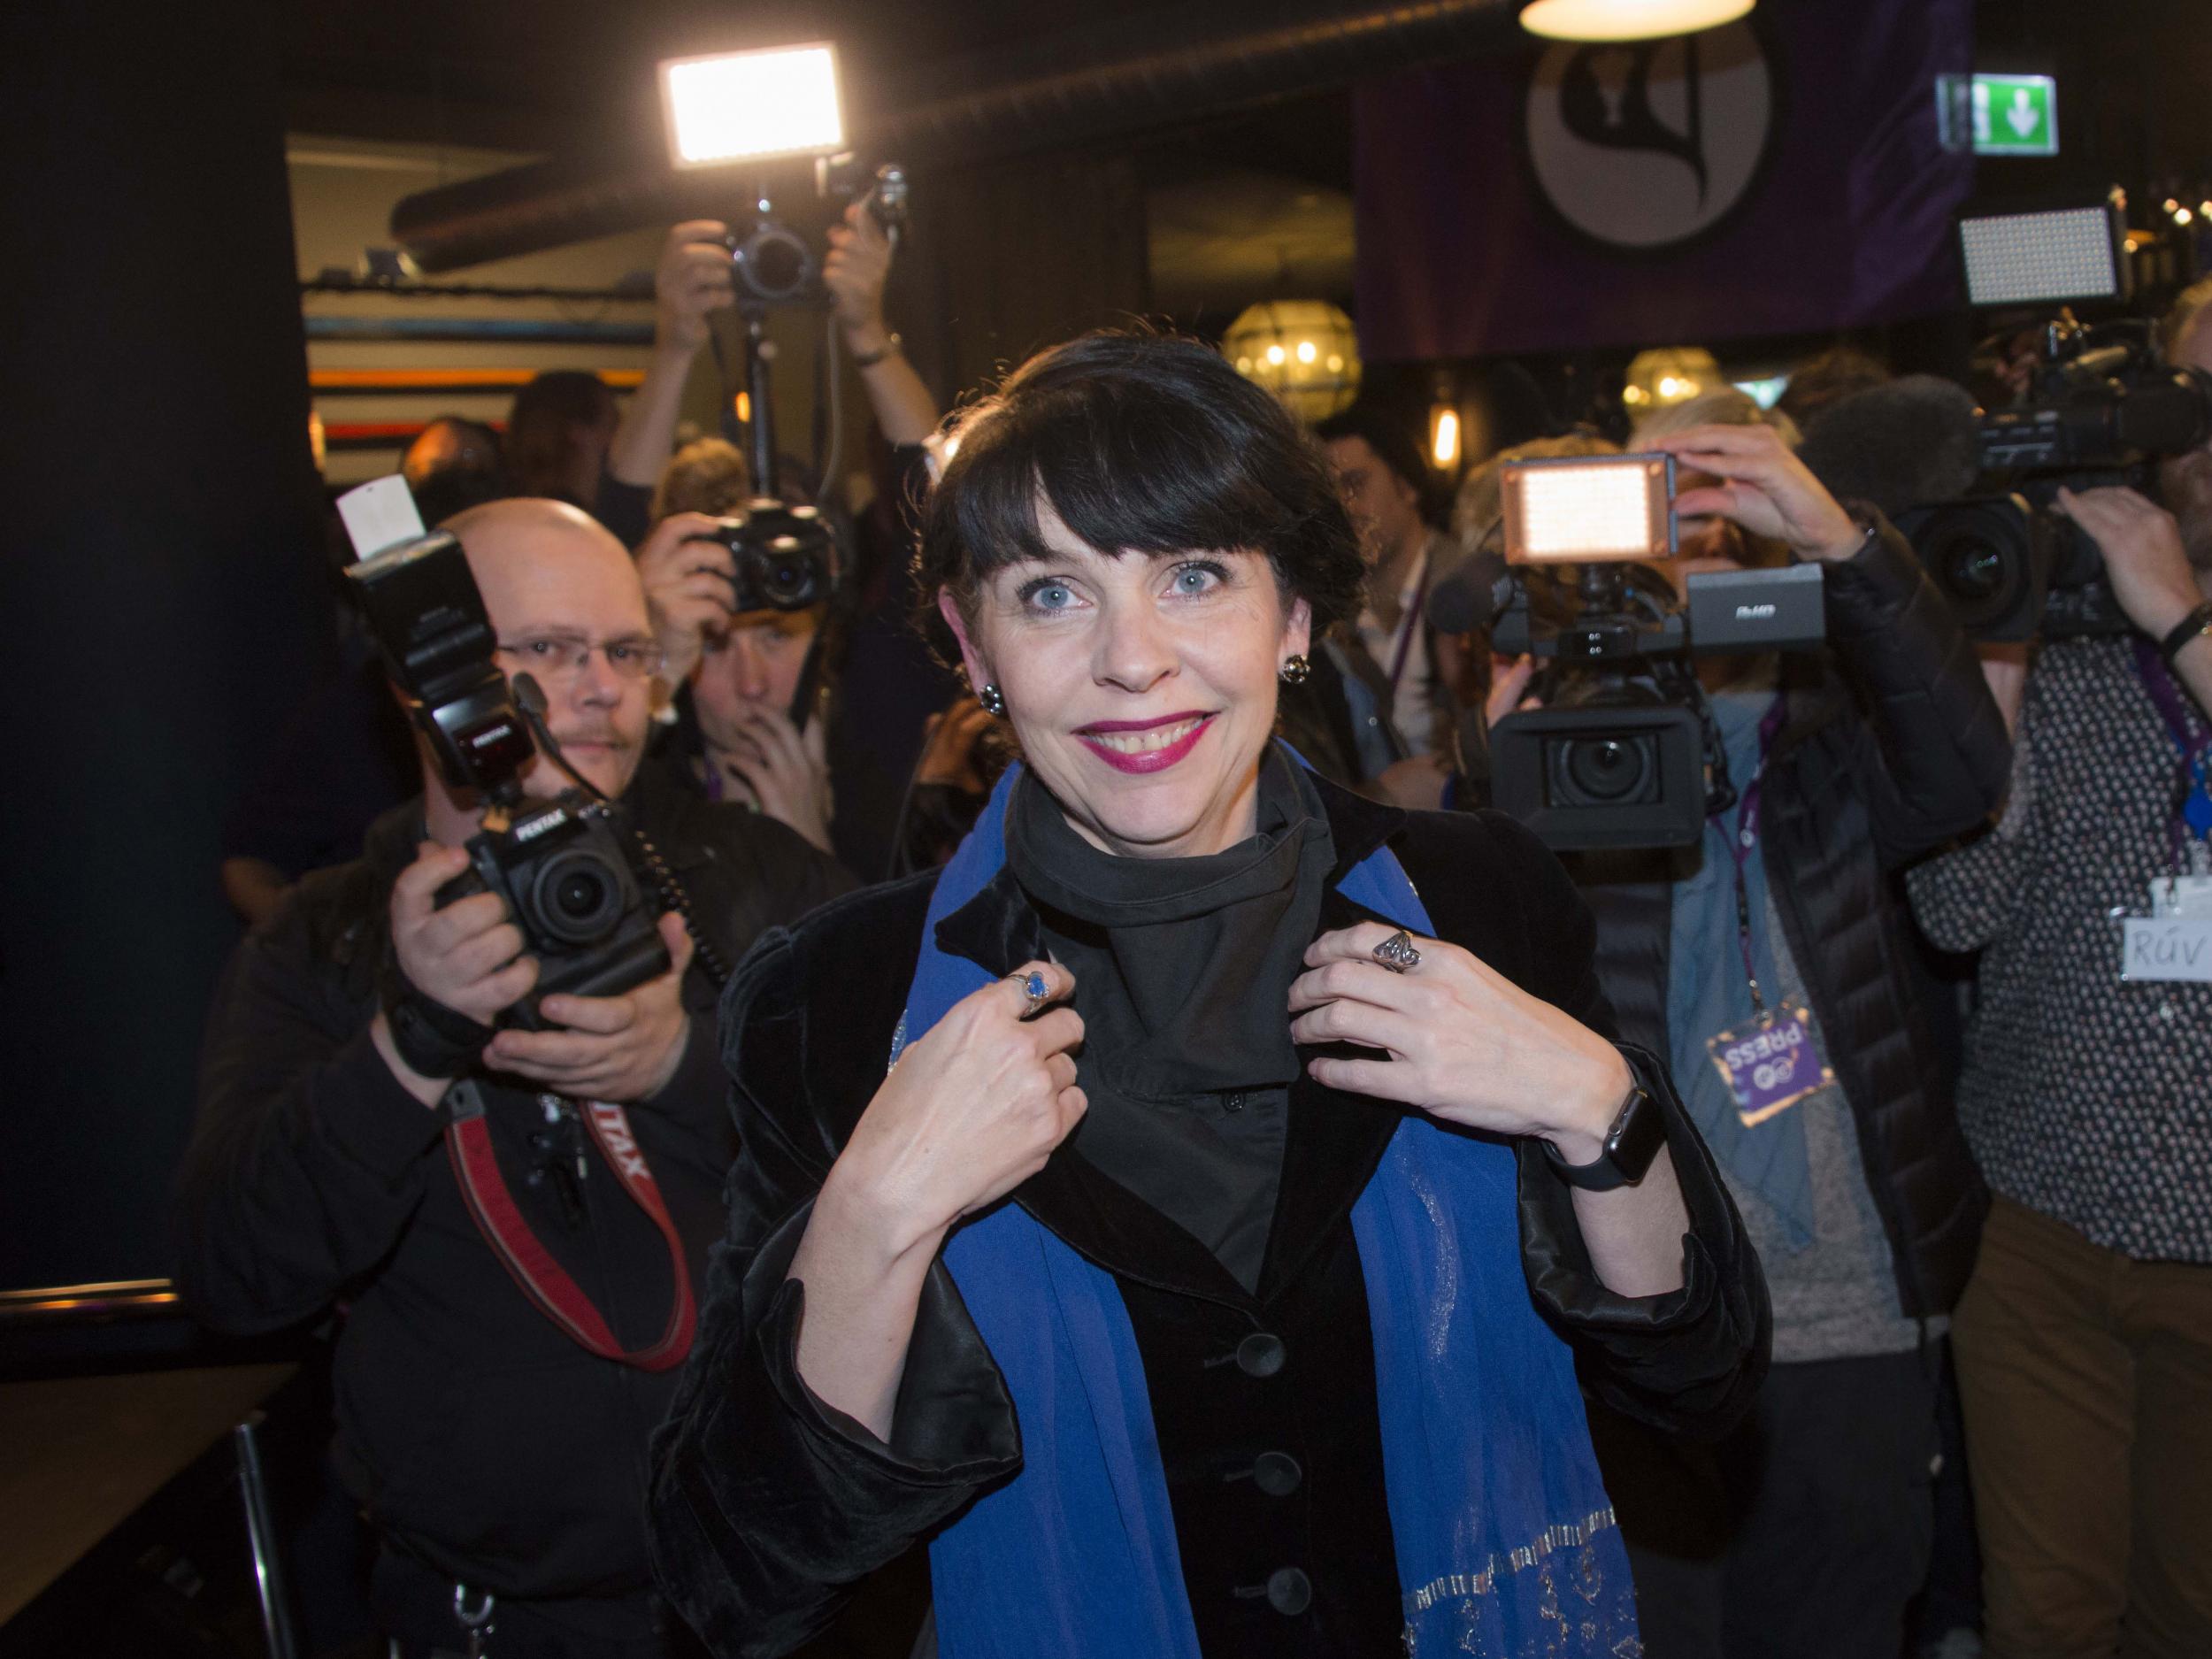 Birgitta Jónsdóttir, Pirate Party founder, admitted she was astonished by its success in the election